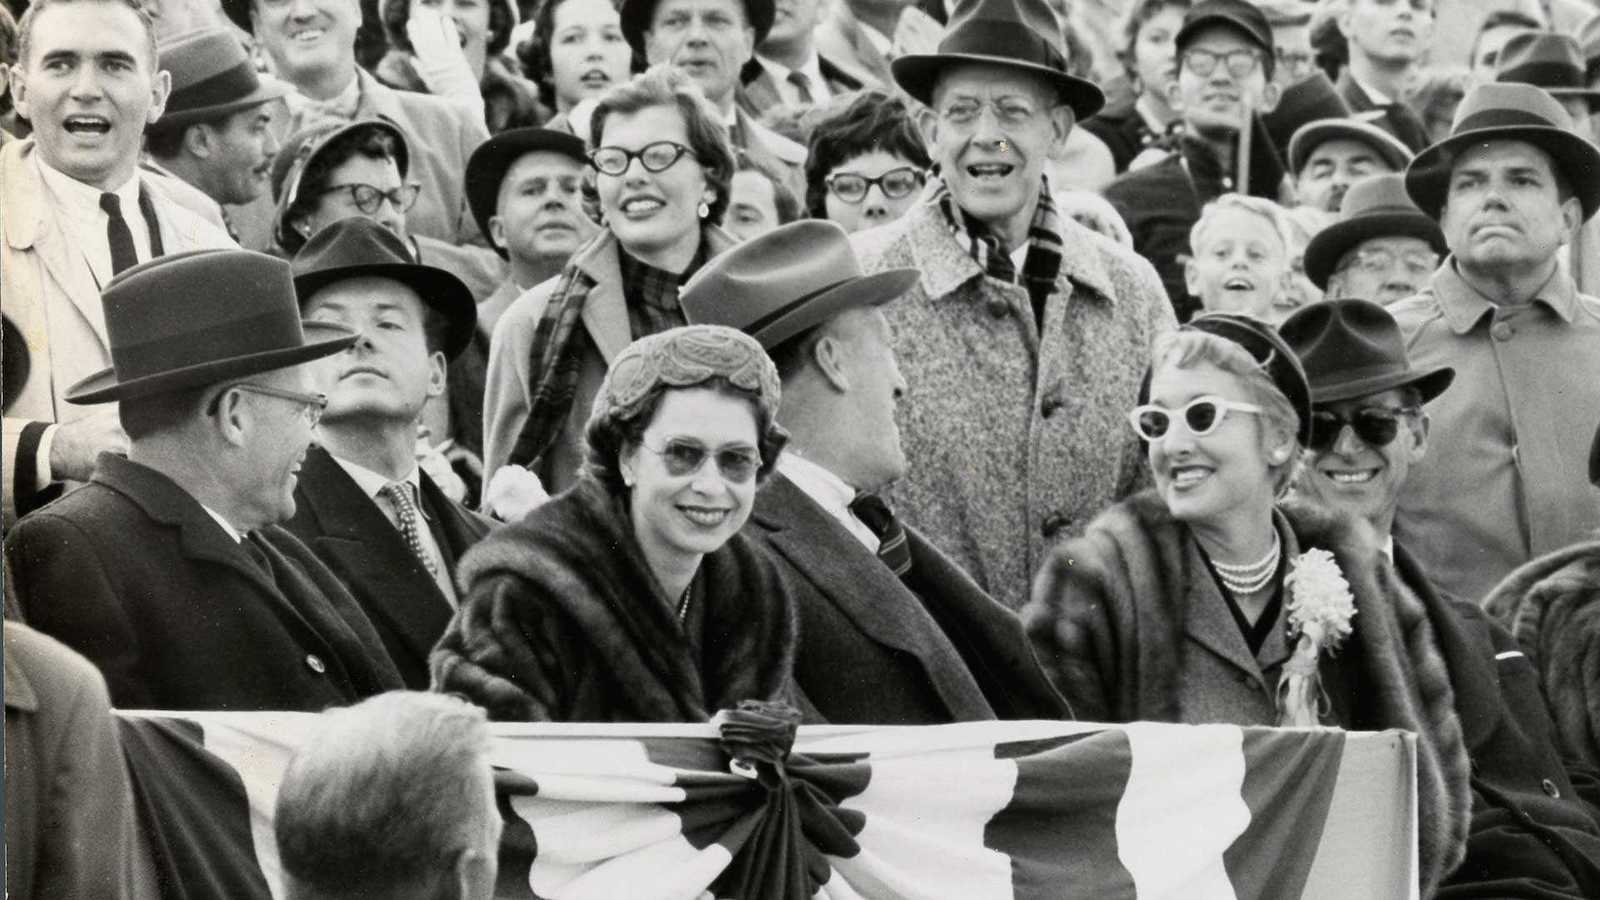 Queen Elizabeth II attends a Maryland football game in 1957